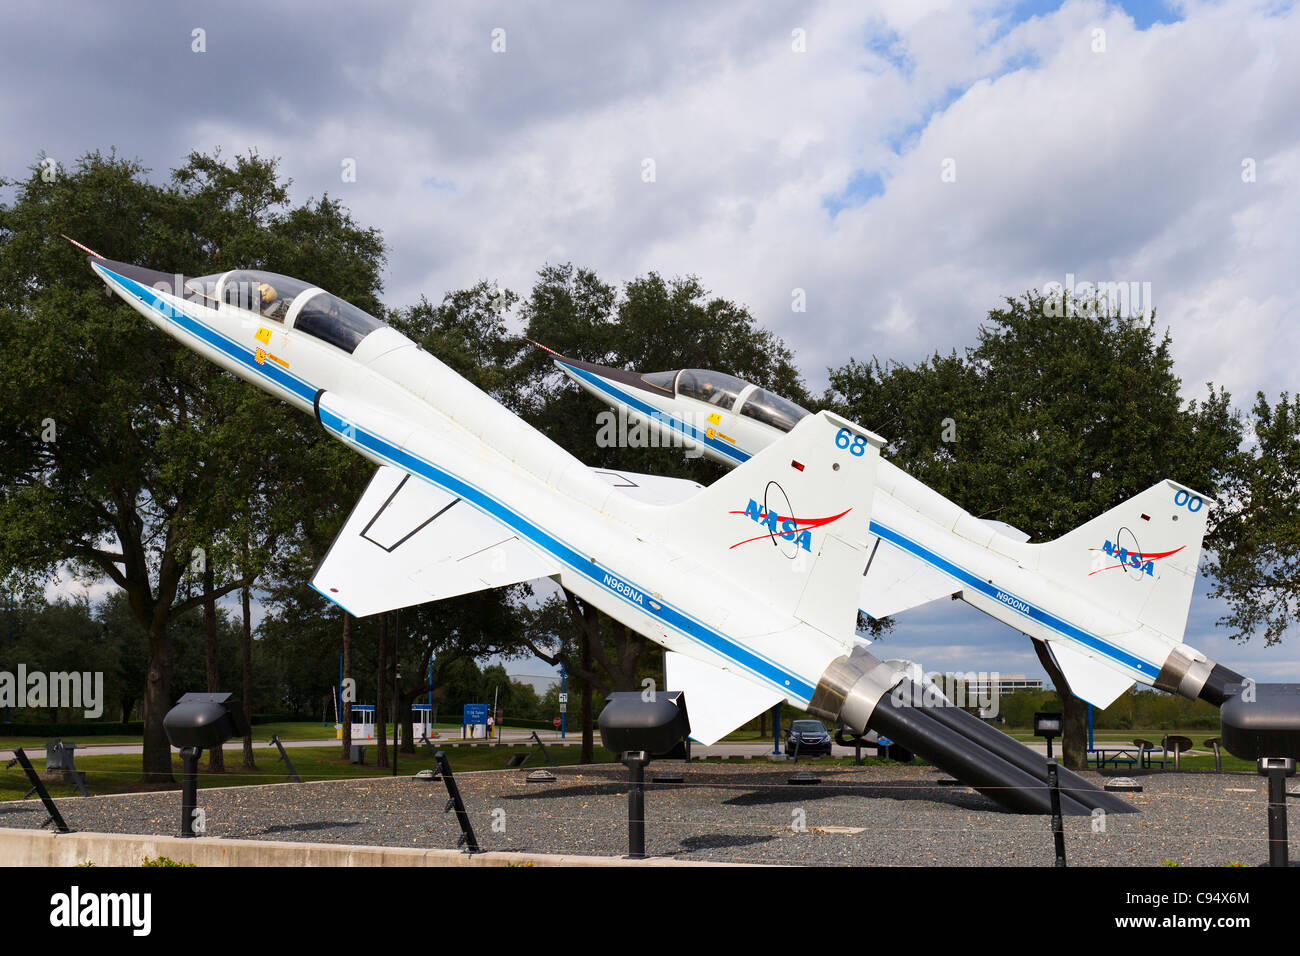 Two Northrop T-38 Talon jet trainers at the entrance to the Houston Space Center, Houston, Texas, USA Stock Photo